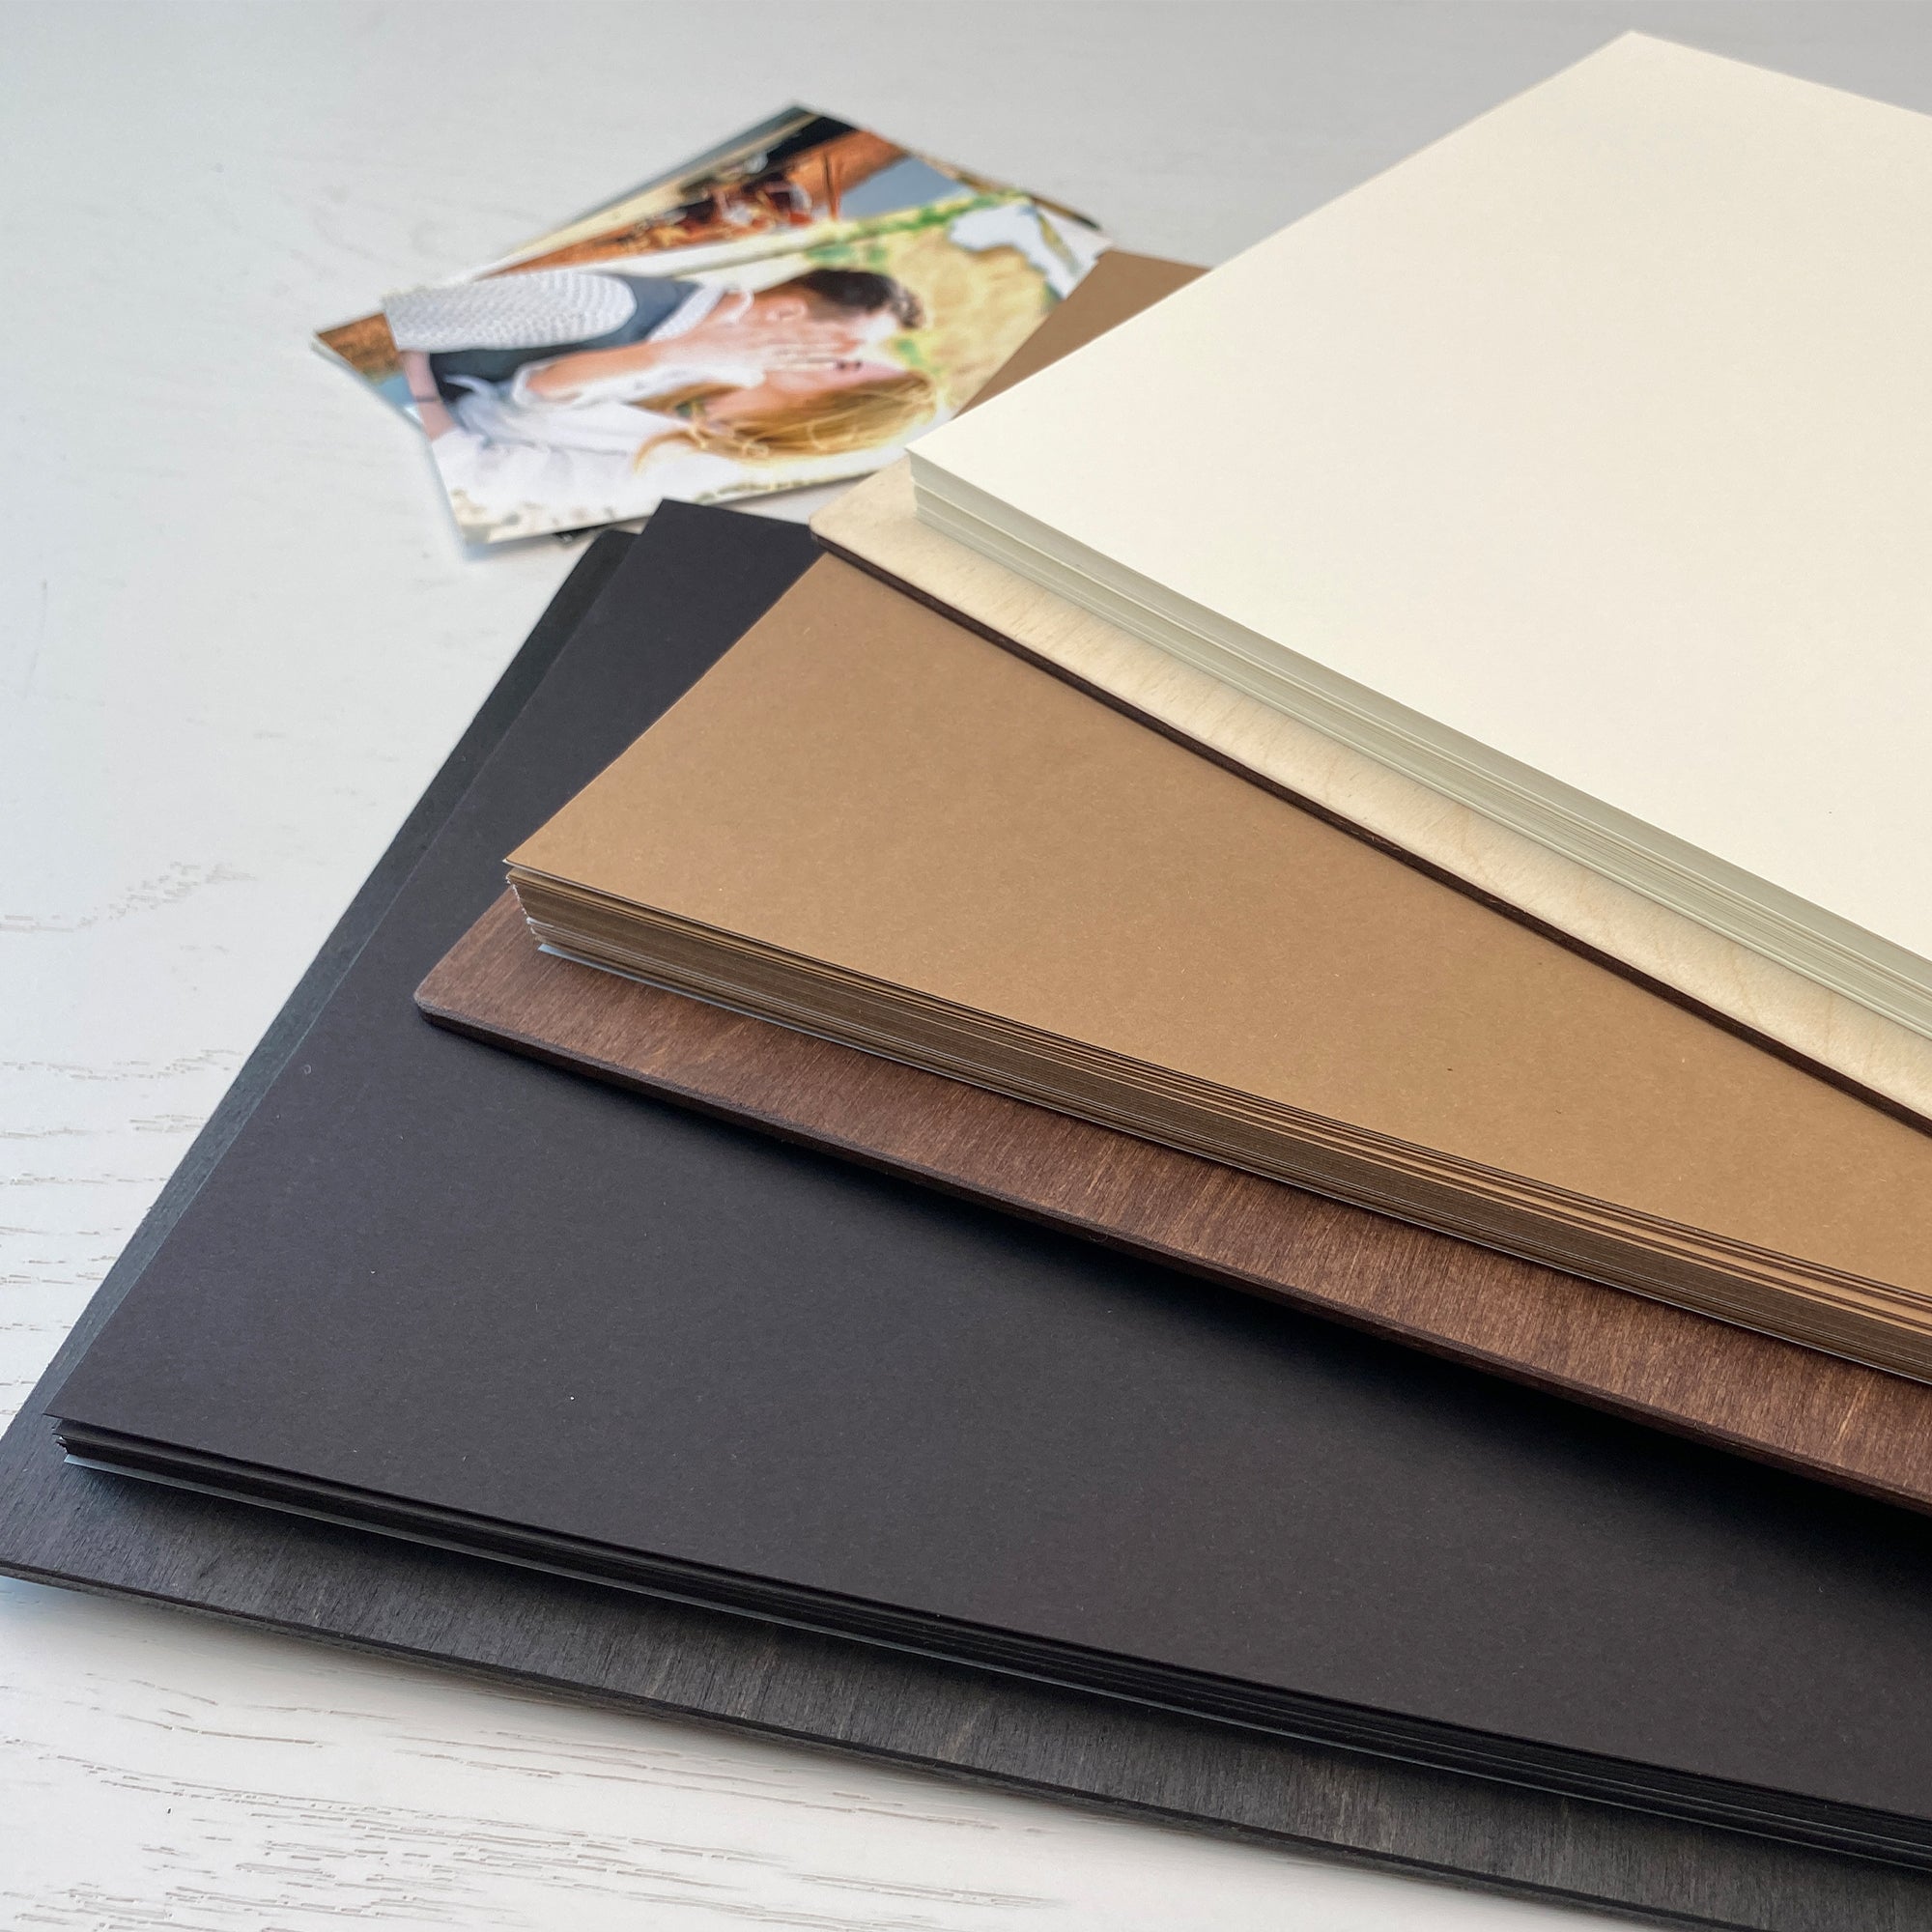 Personalized photo album with leather cover and Wedding initials engraving